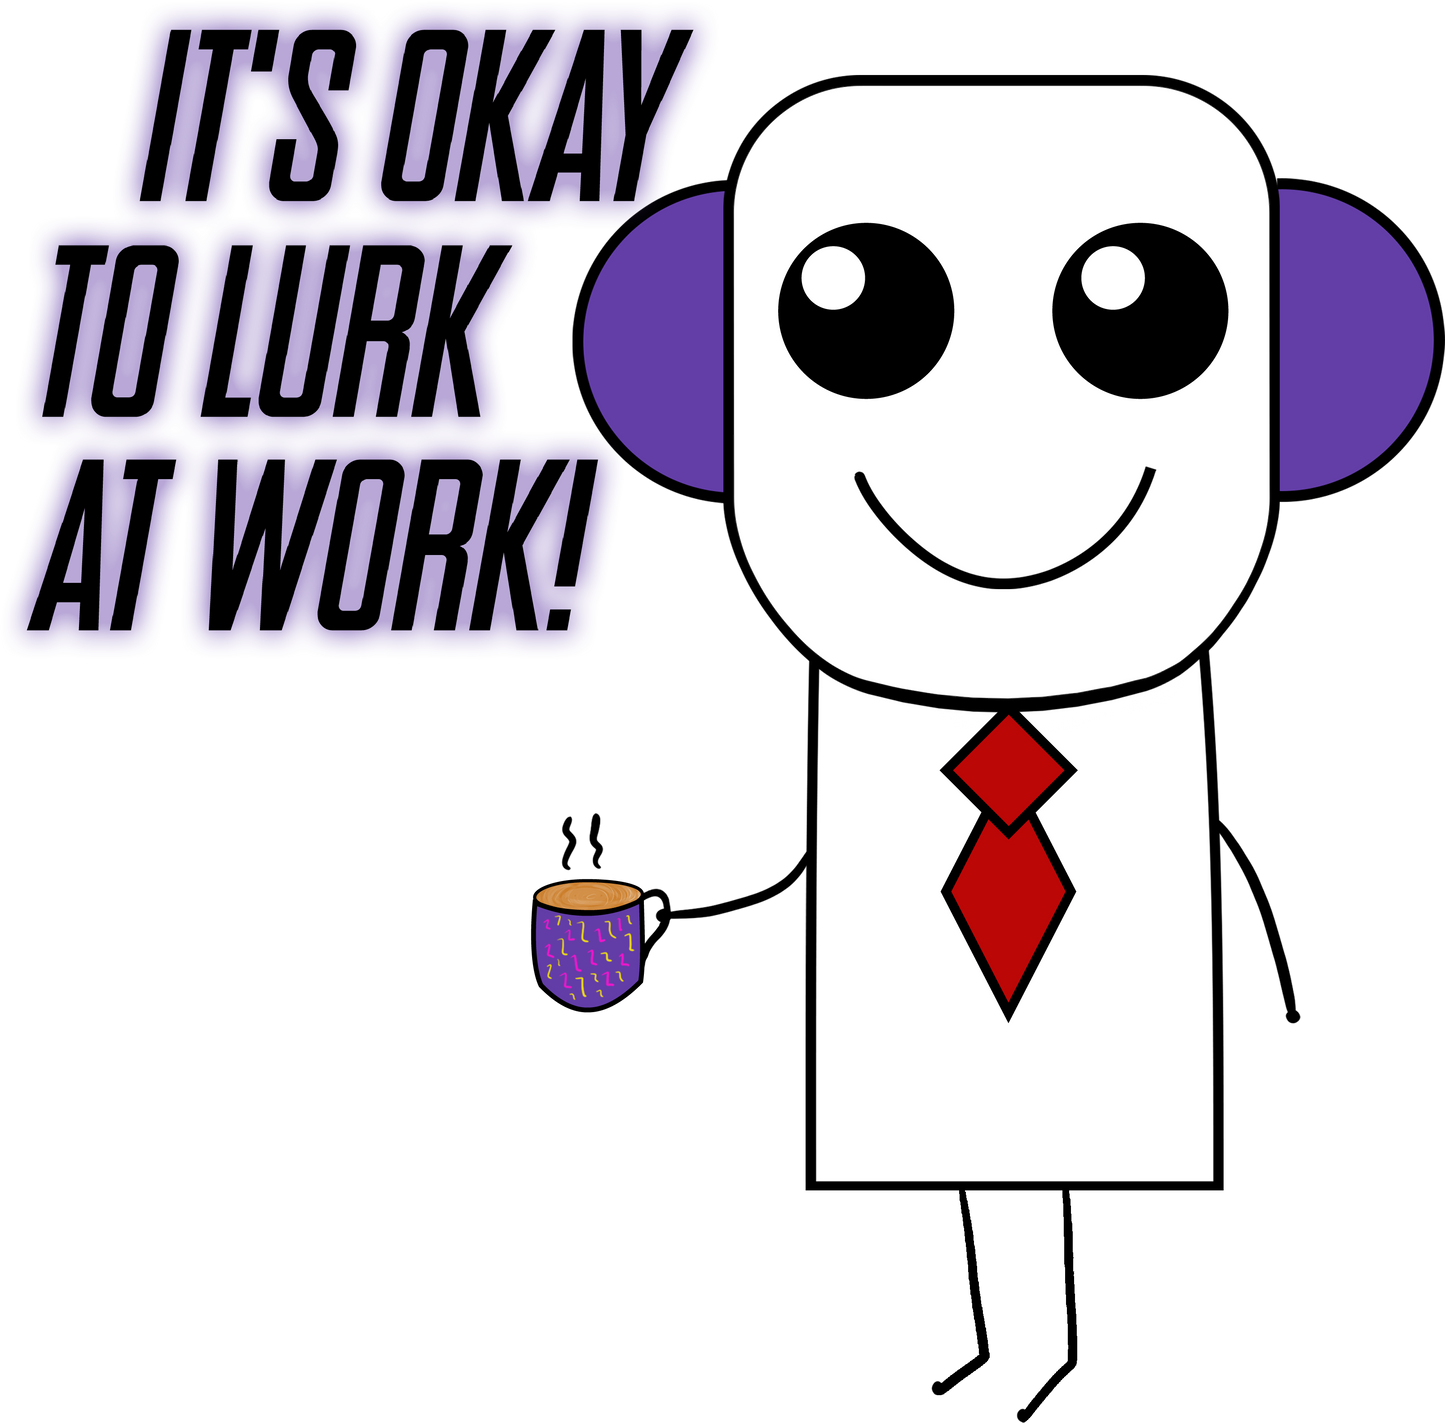 It's Okay To Lurk At Work